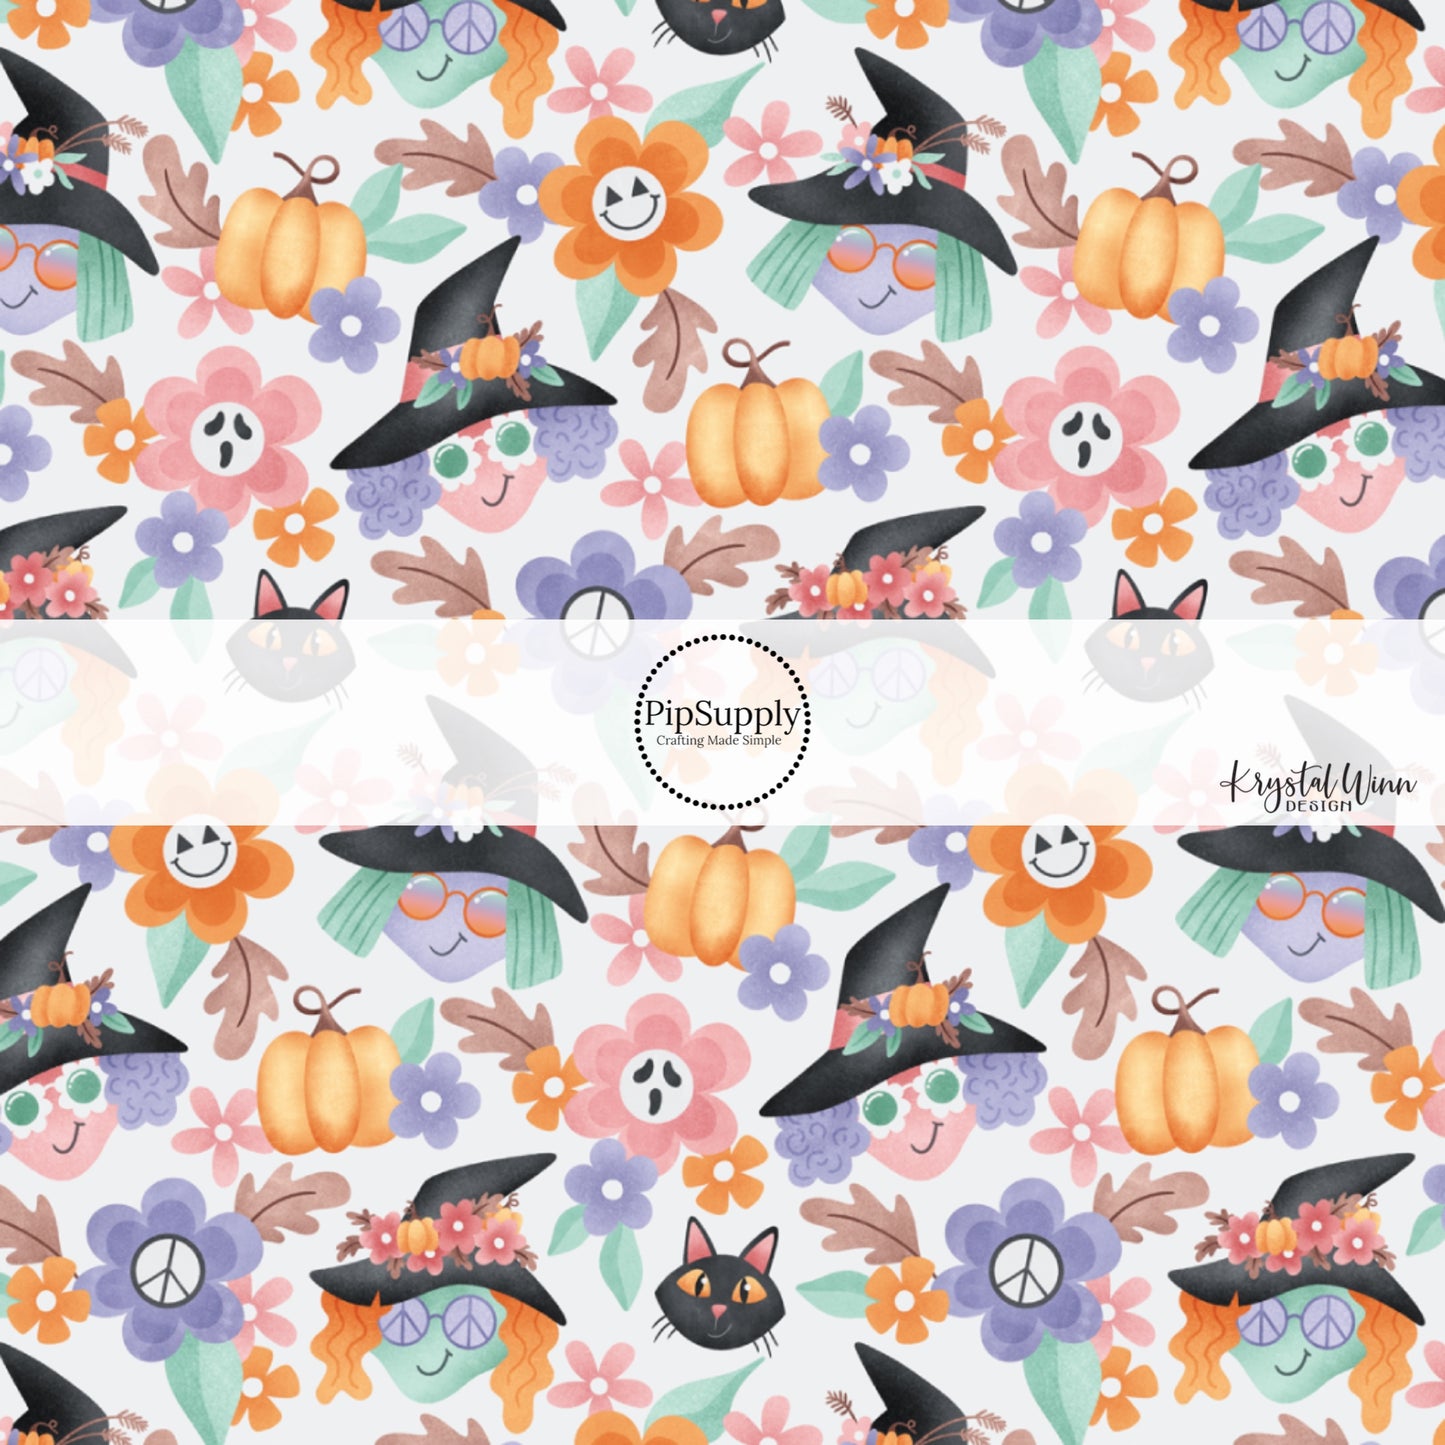 These Halloween themed cream fabric by the yard features witches, hats, black cats, small daisies, and pumpkins on cream. This fun spooky themed fabric can be used for all your sewing and crafting needs! 